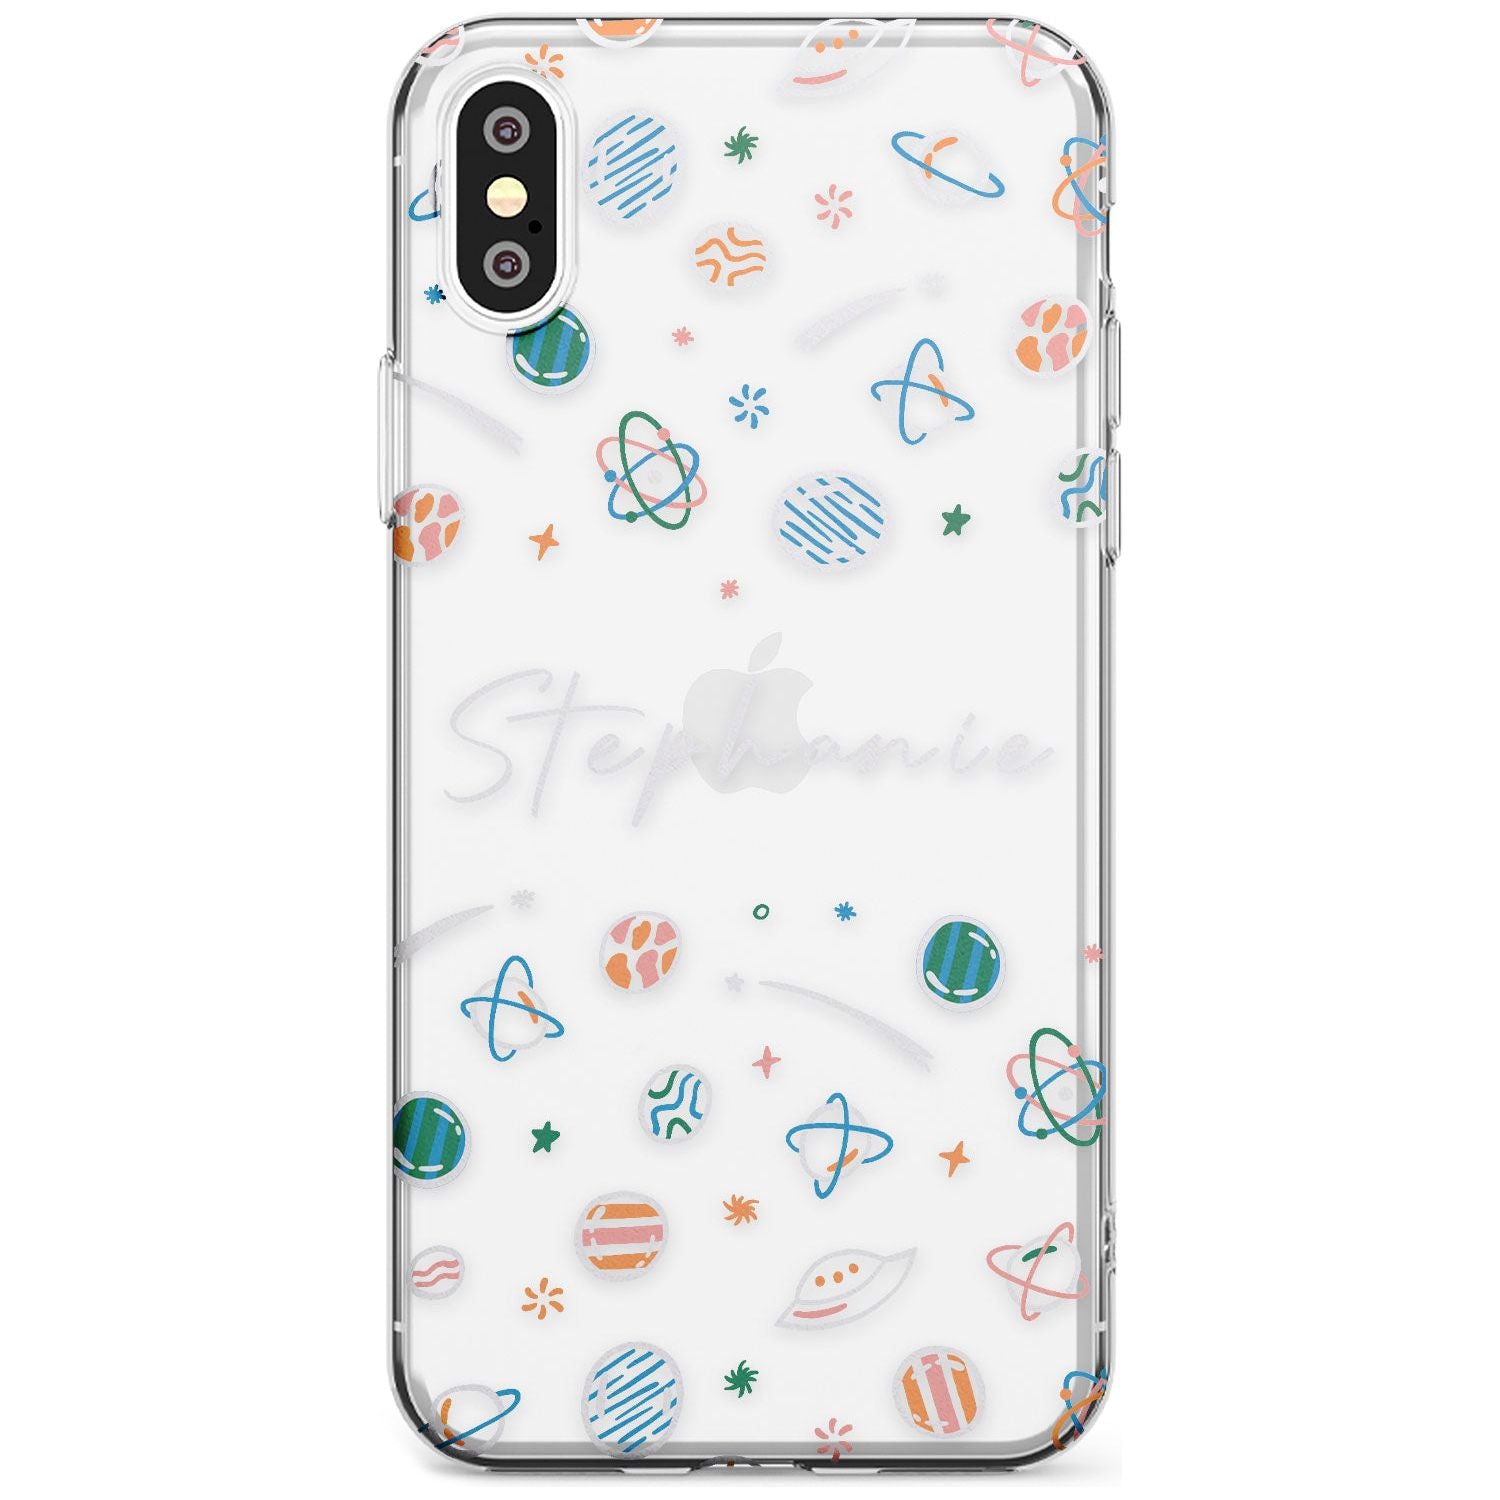 Customisable Space Pattern (Clear) Black Impact Phone Case for iPhone X XS Max XR